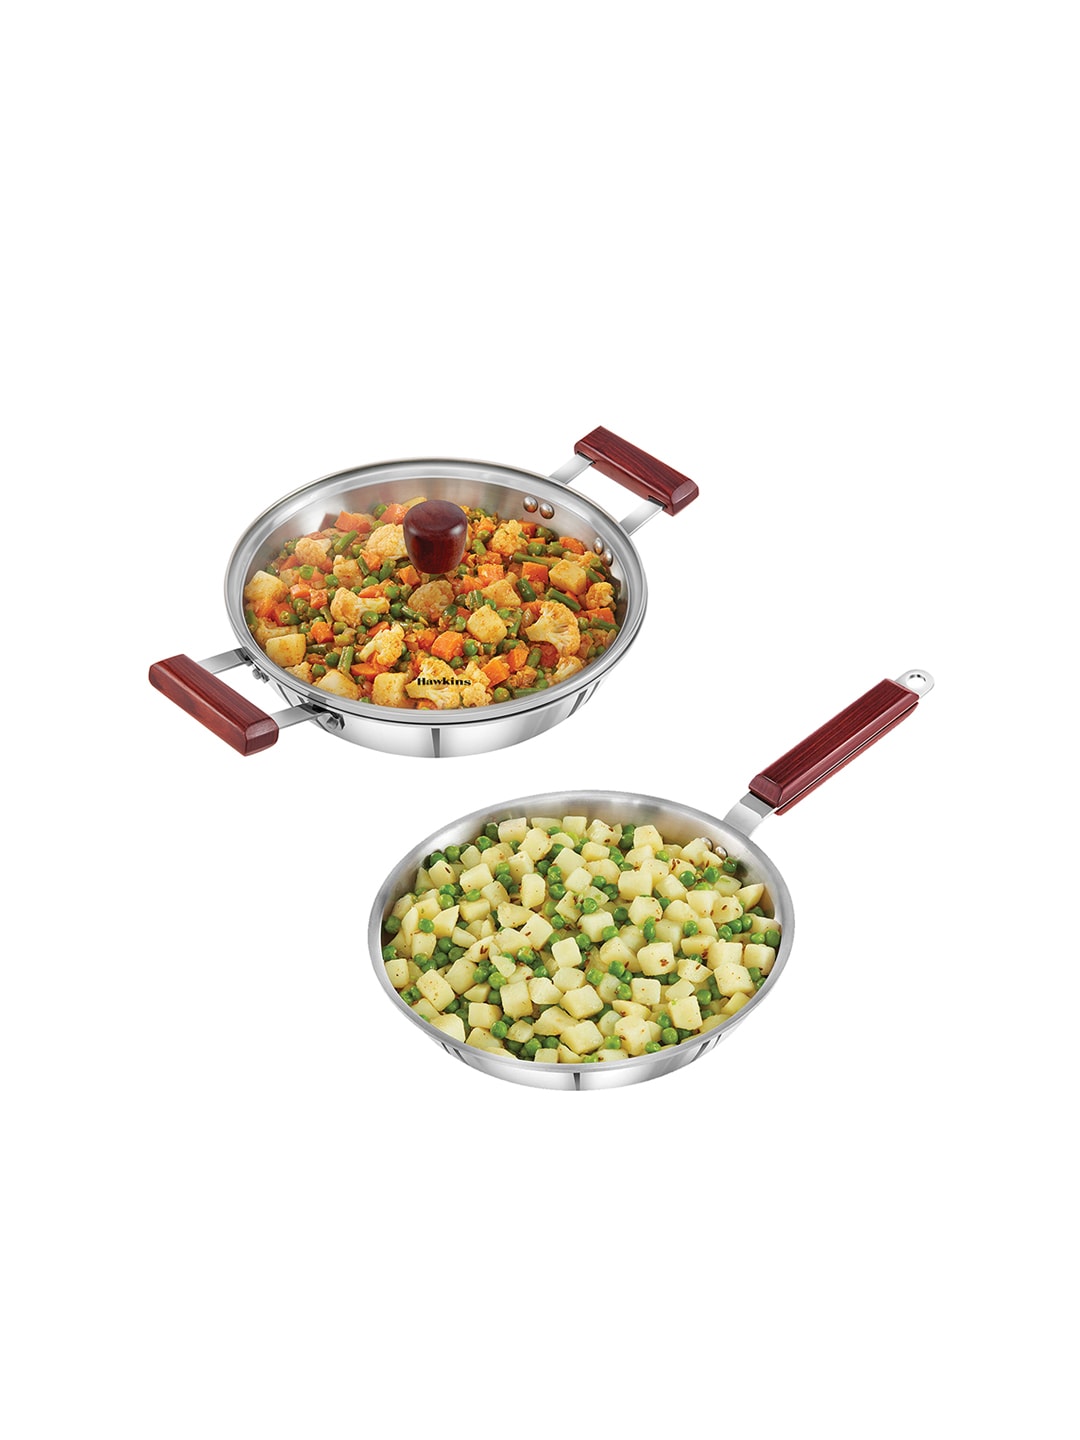 Hawkins Silver-Toned Tri-ply Stainless Steel Frying Pan & Kadhai with Lid Price in India